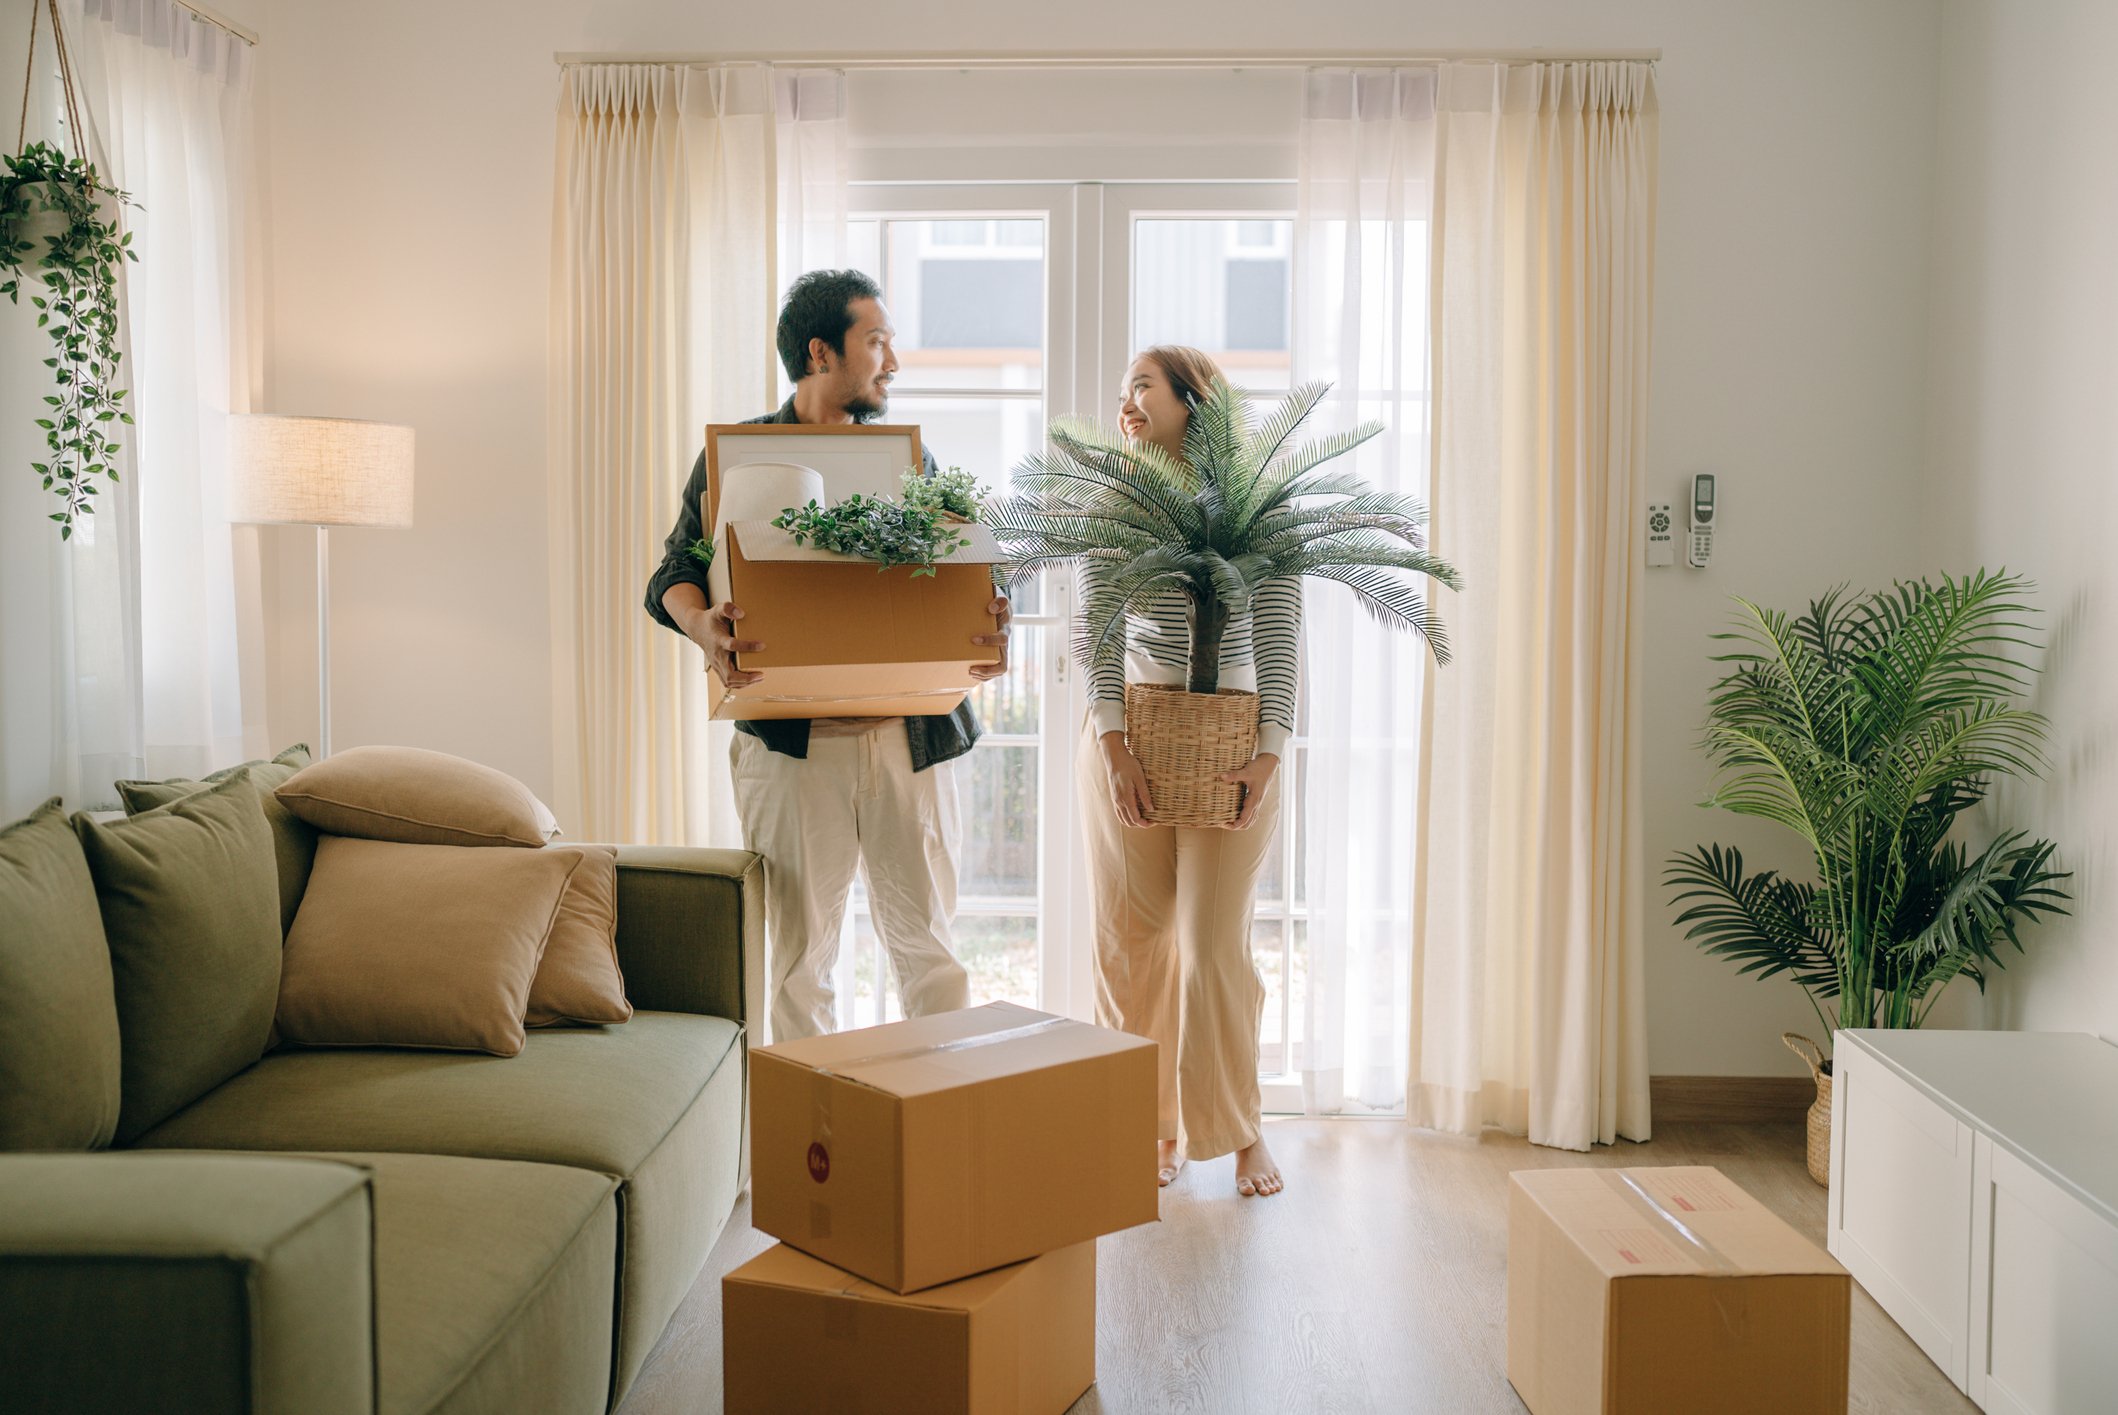 Top Tips For Stress Reduction When Moving Home